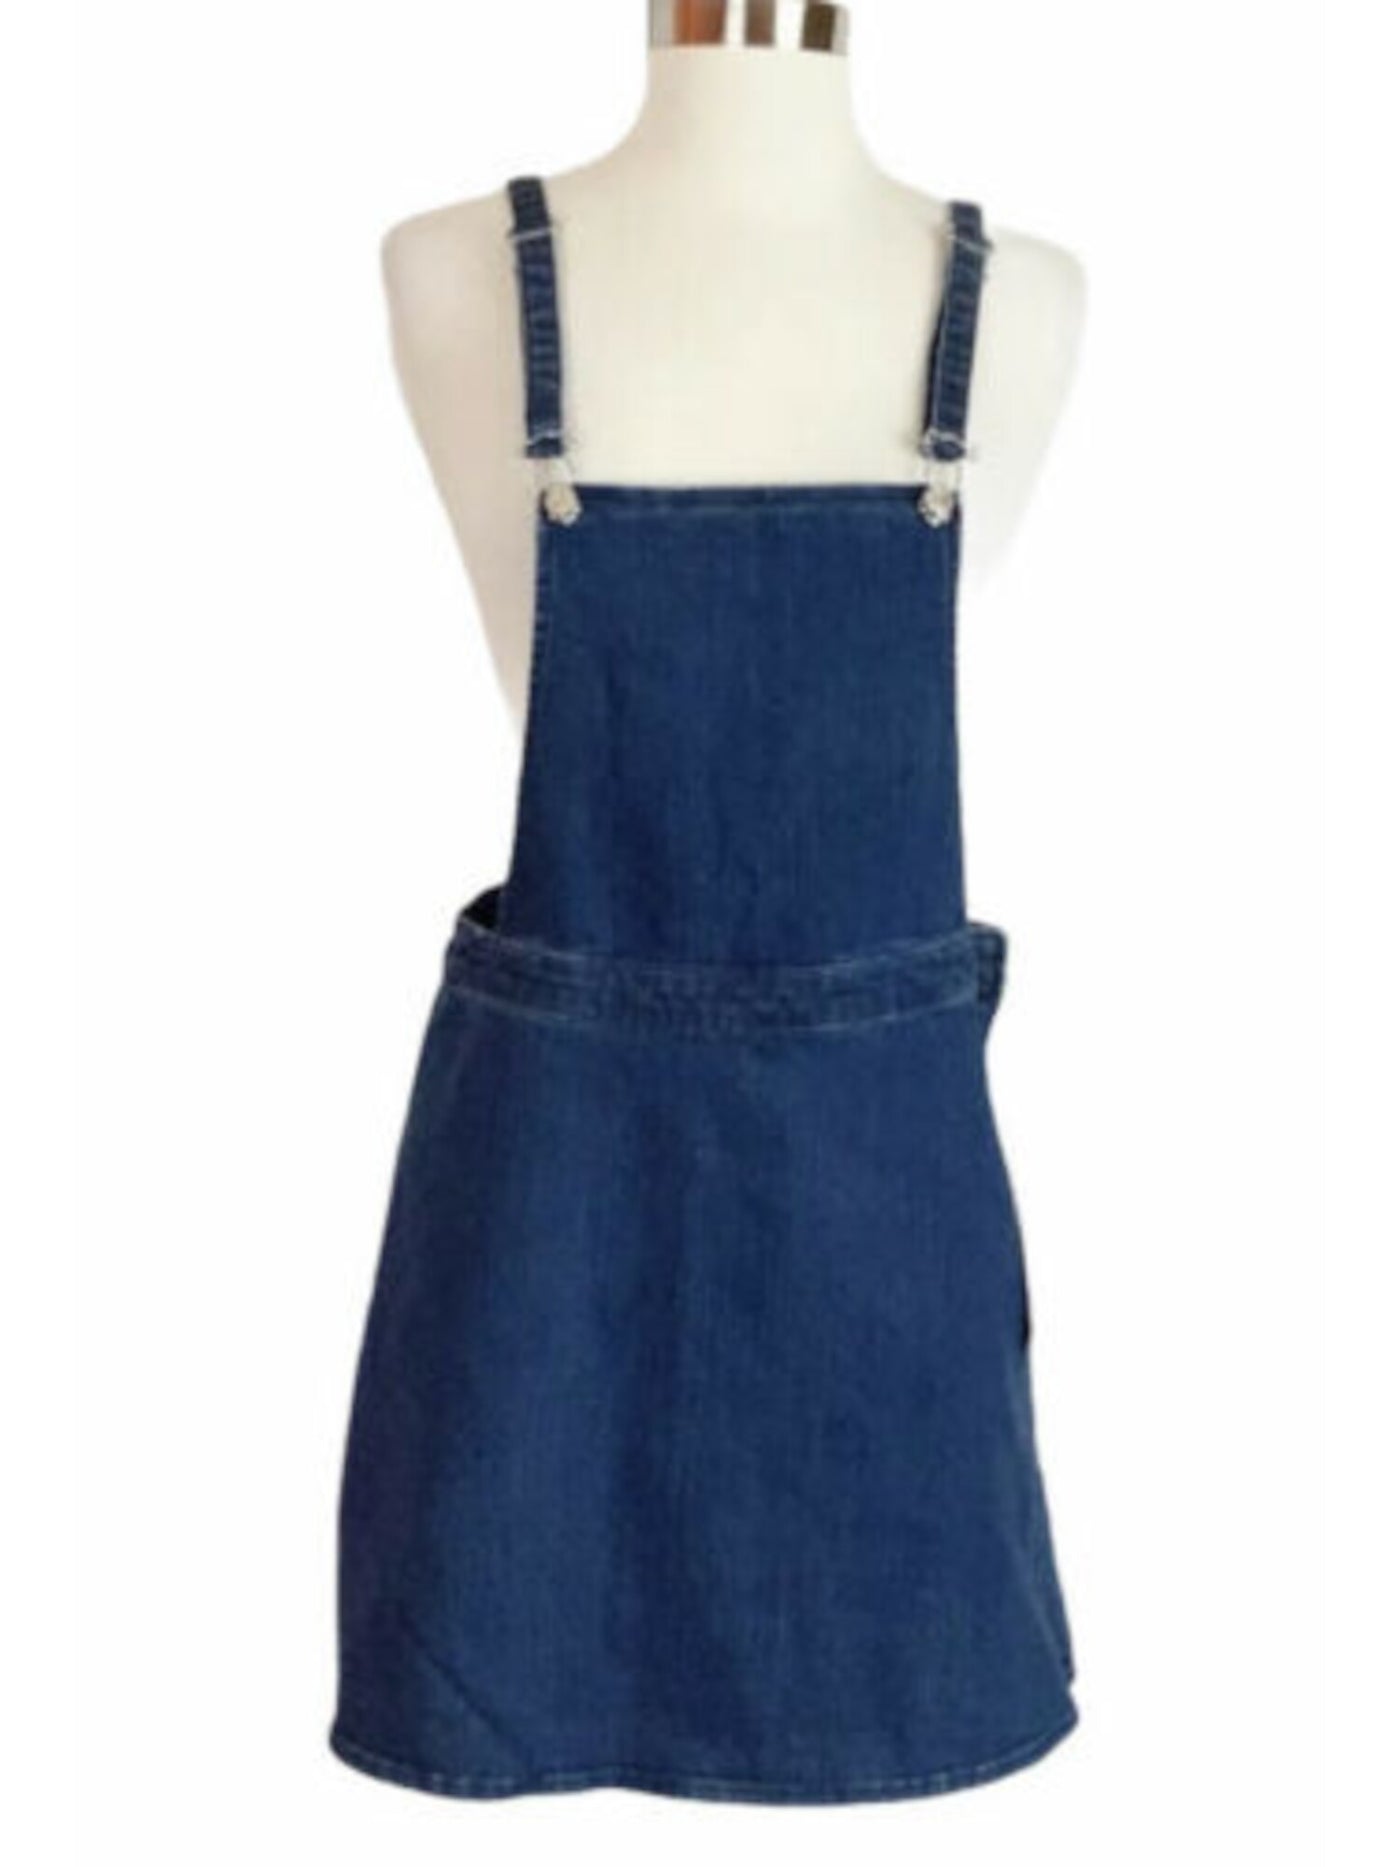 GUESS Womens Blue Sleeveless Square Neck Above The Knee Denim Dress Size: 2